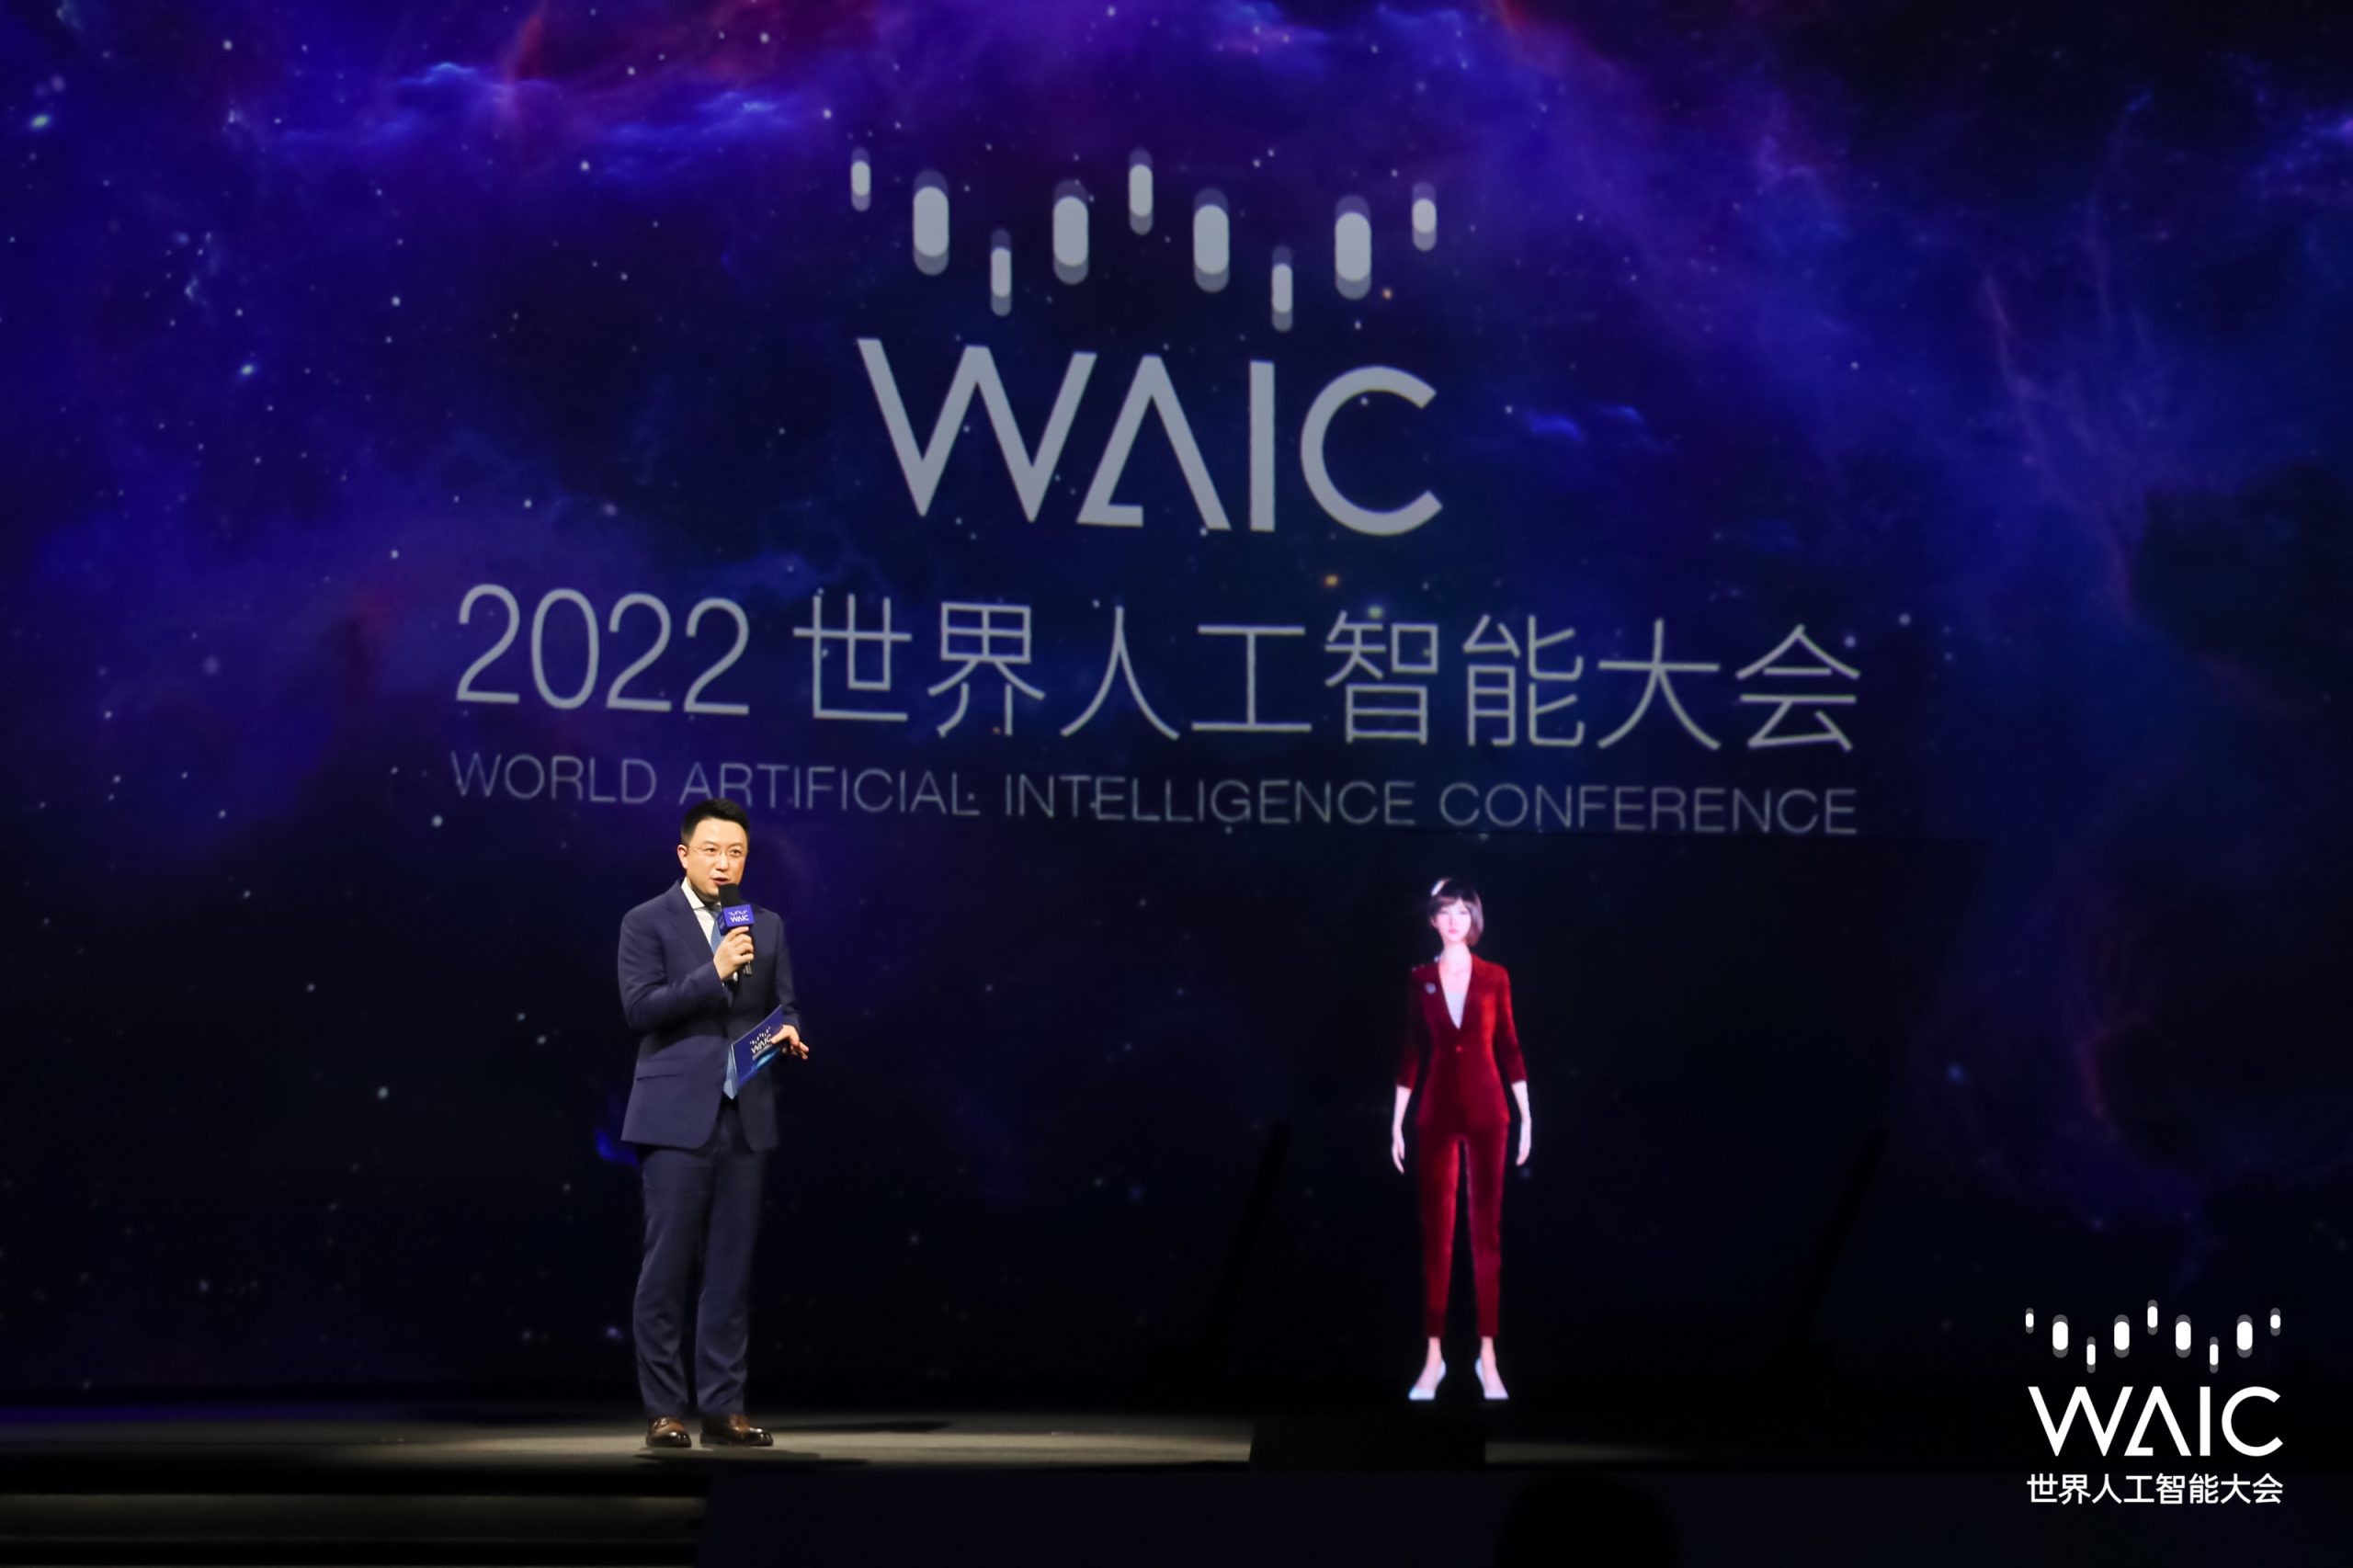 Exploring WAIC 2022: 5 highlights from the metaverse and AI-focused Shanghai tech event